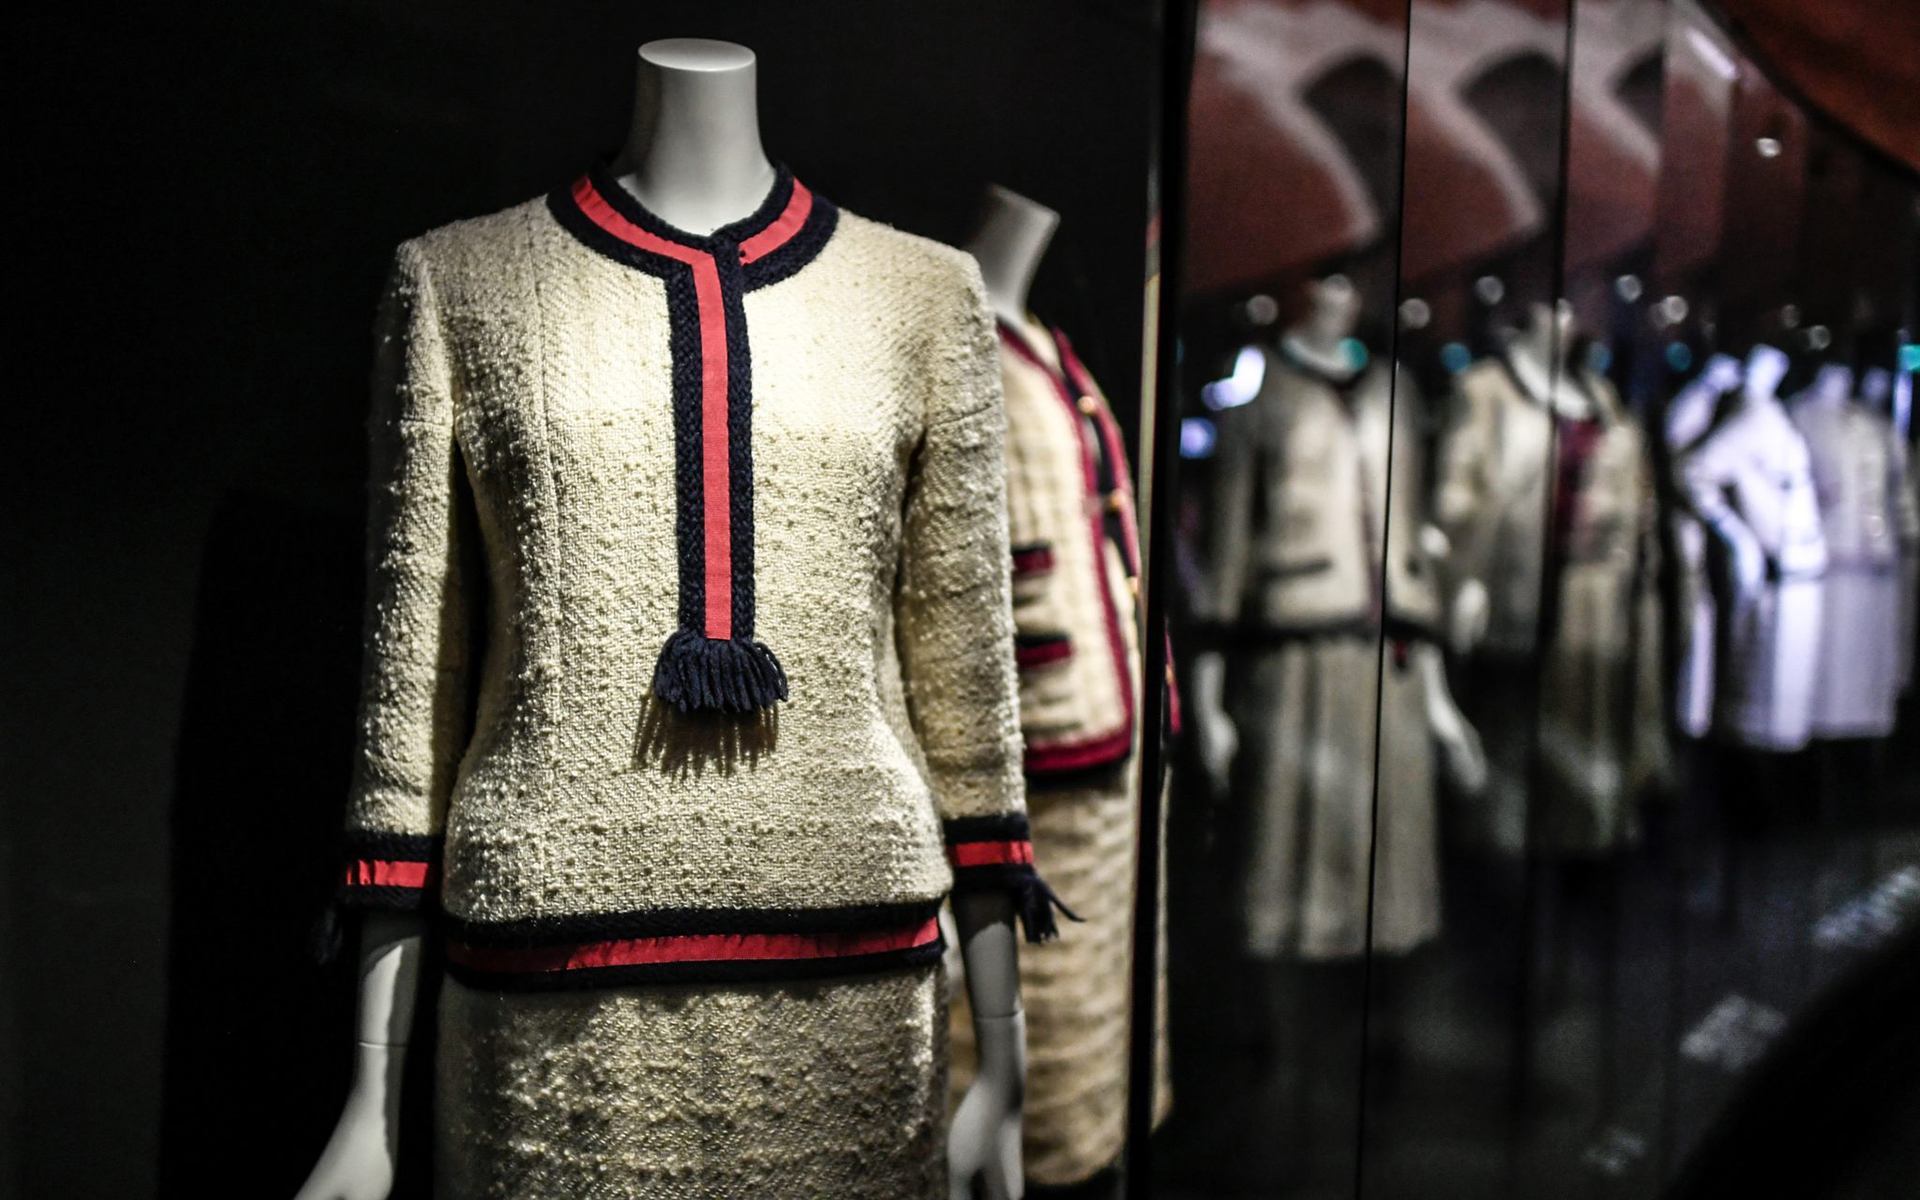 5 things Coco Chanel has changed the world of fashion with